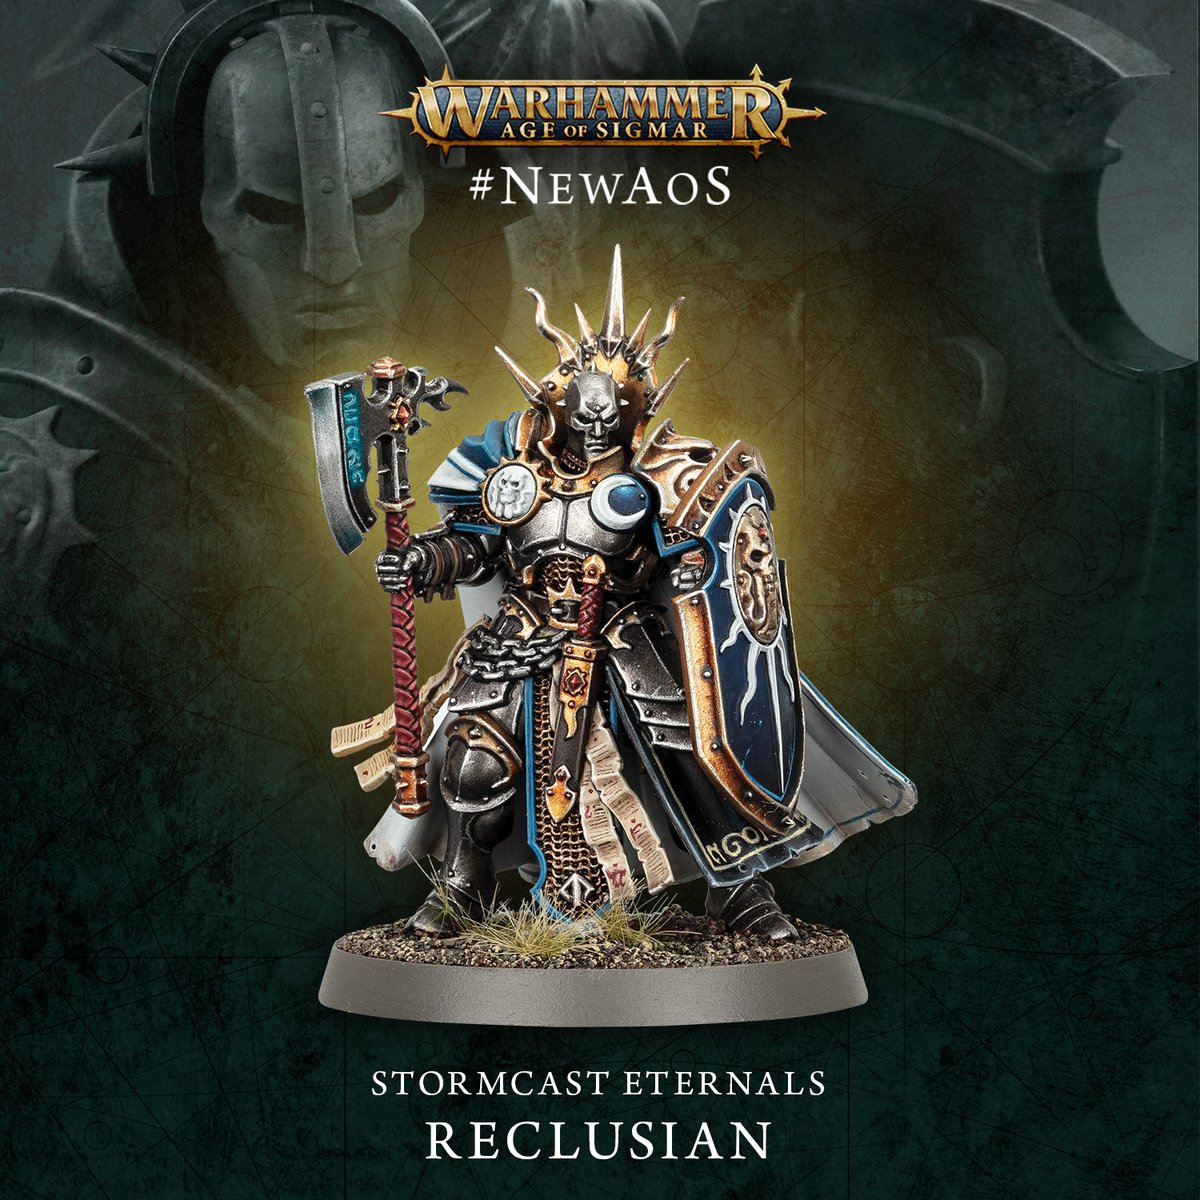 Desperate times call for desperate measures – meet the Reclusian, unleashed from the Ruination Chamber. ow.ly/yynF50Rg5C6 #WarhammerCommunity #NewAoS